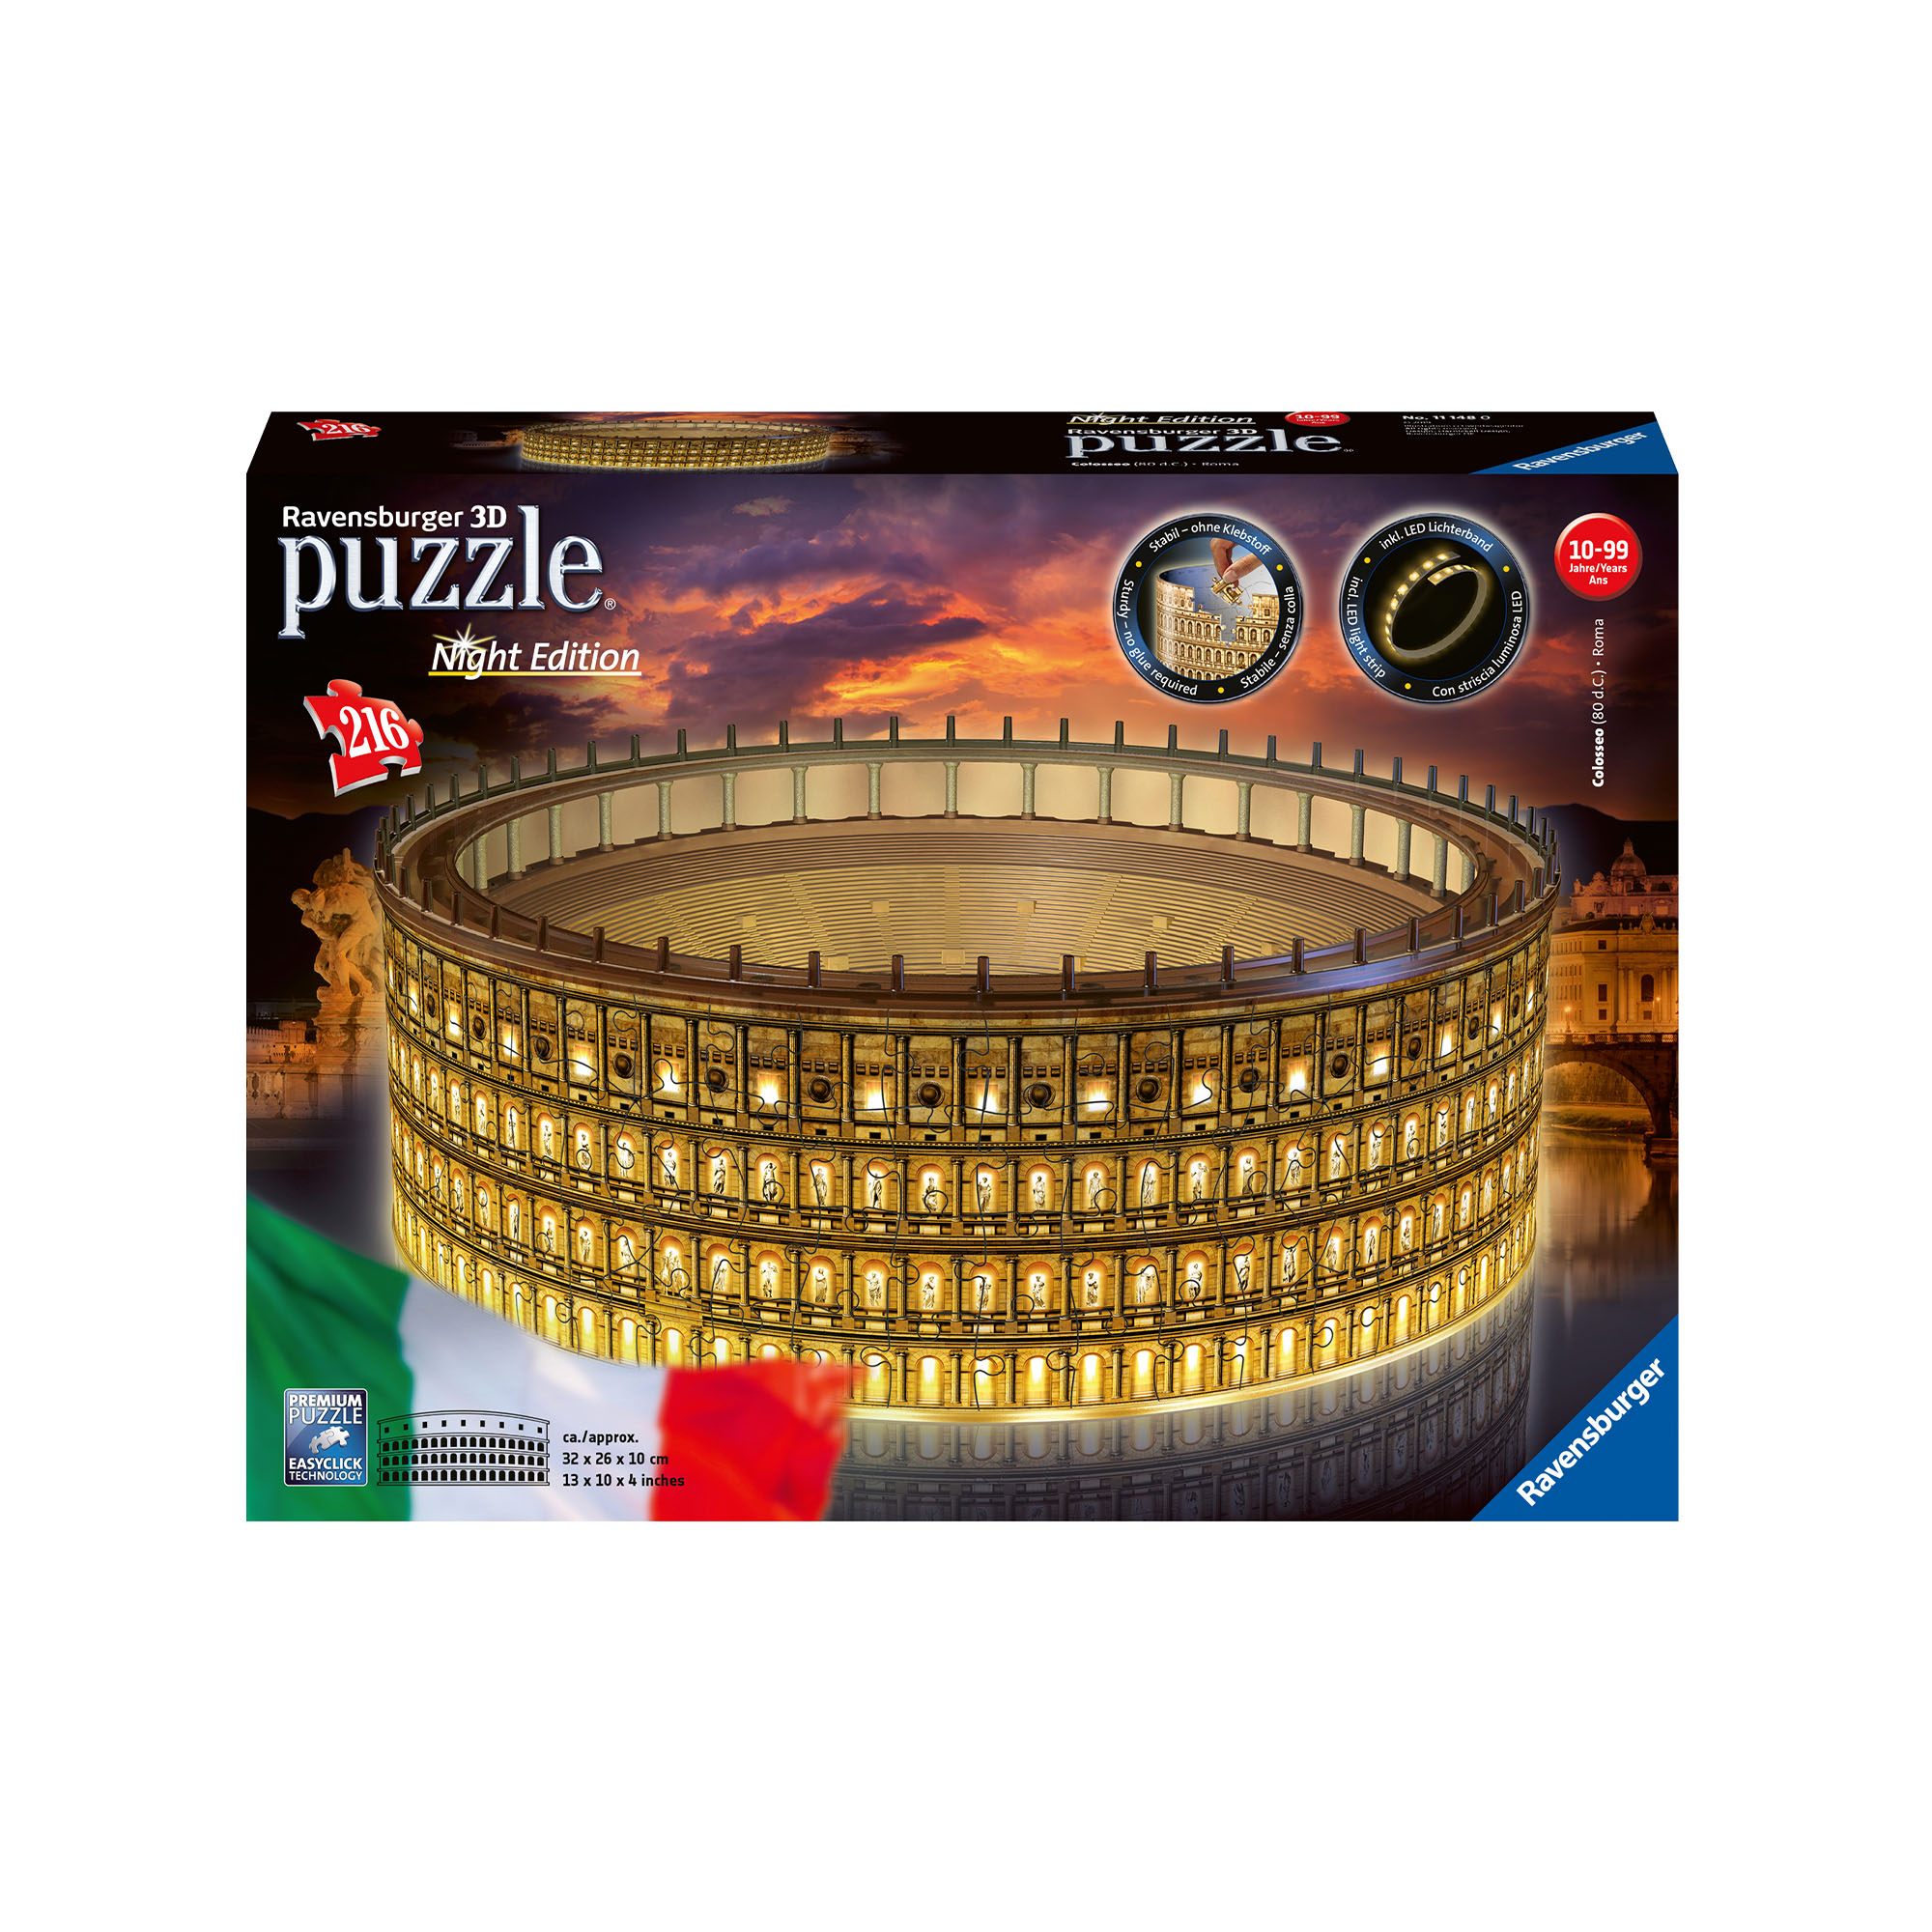 Ravensburger 3D Puzzle Building - 11148 - Colosseo night edition, , large